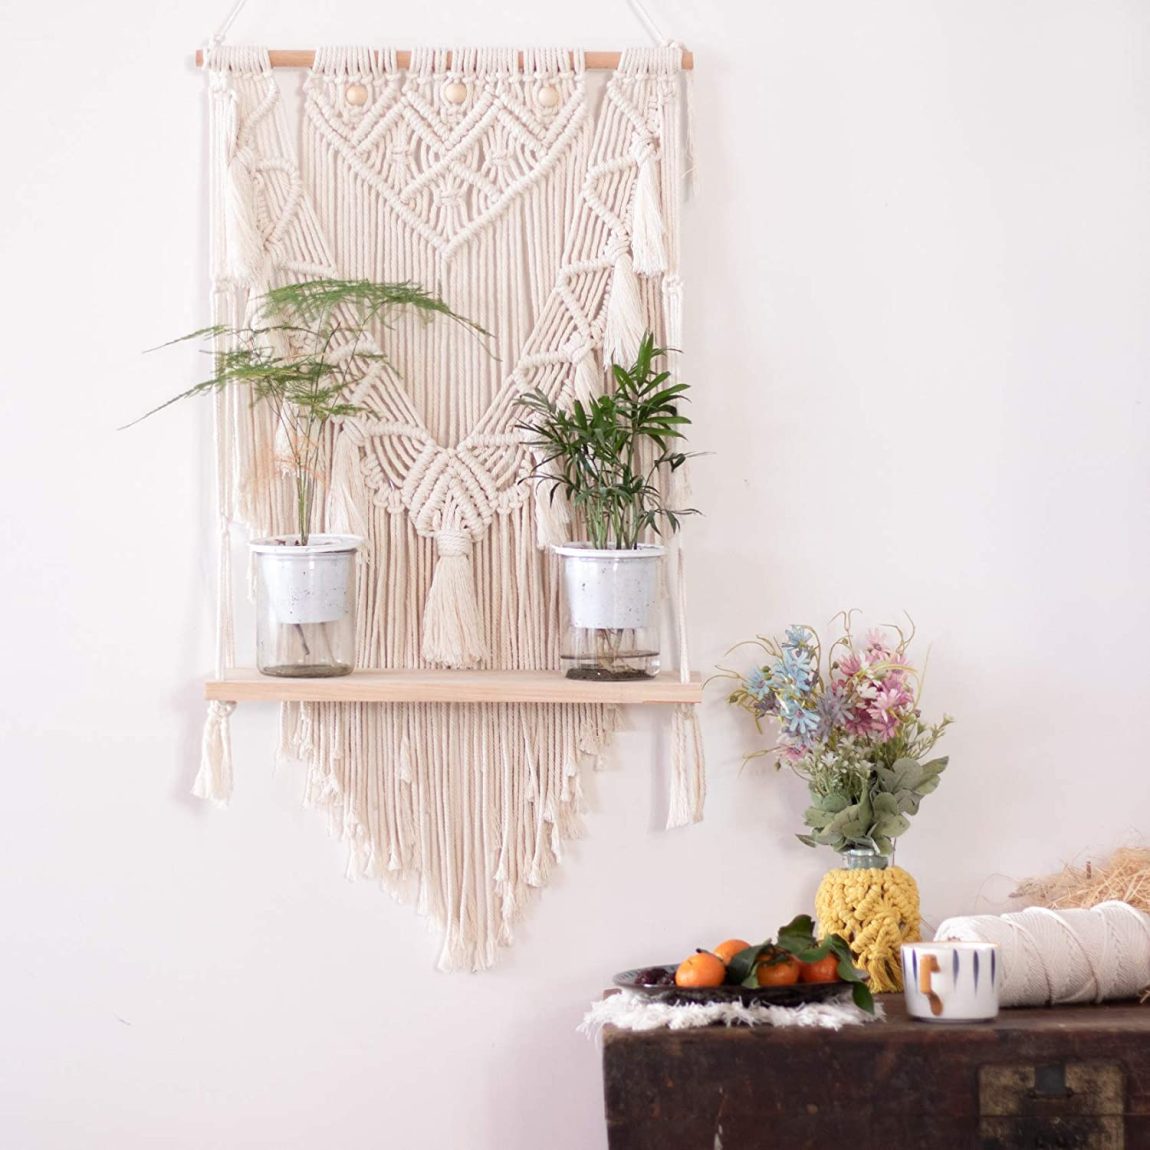 Where to Buy Large Macrame Hanging Wall Decor - Macrame hanging | Macrame planter | Macrame curtains | Macrame ideas | Macrame decor | Macrame circle | Macrame hanger | Hanging macrame | Textile inspiration | Textile art | Textile love | Textile fabric | Textile design | Woven hanging | Textile fabric